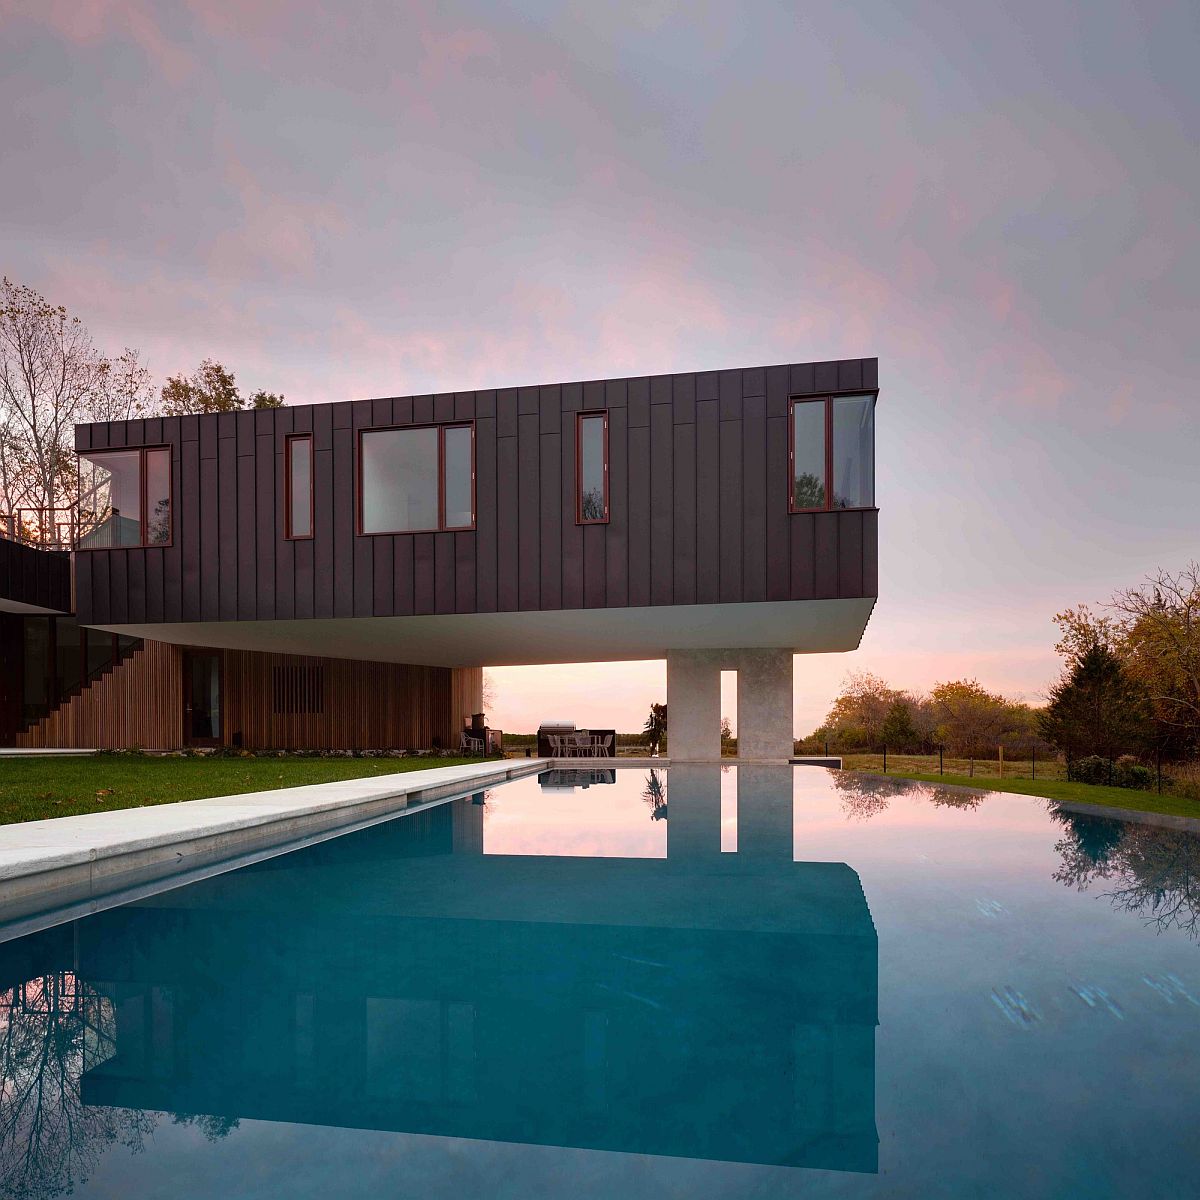 Cantilevered-home-structure-floats-above-the-pool-below